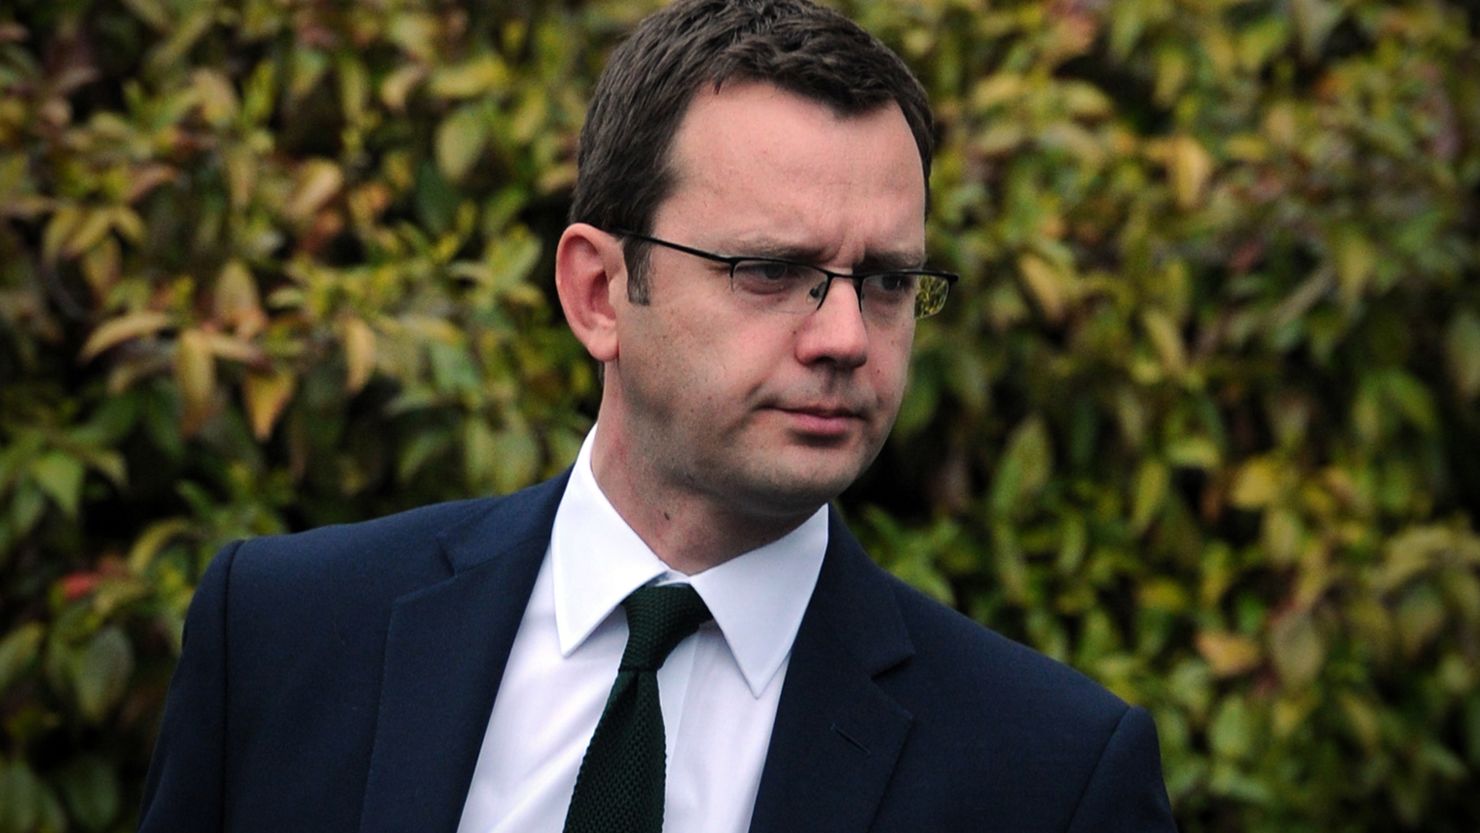 Former News of the World editor Andy Coulson resigned as British PM David Cameron's communications chief last year.